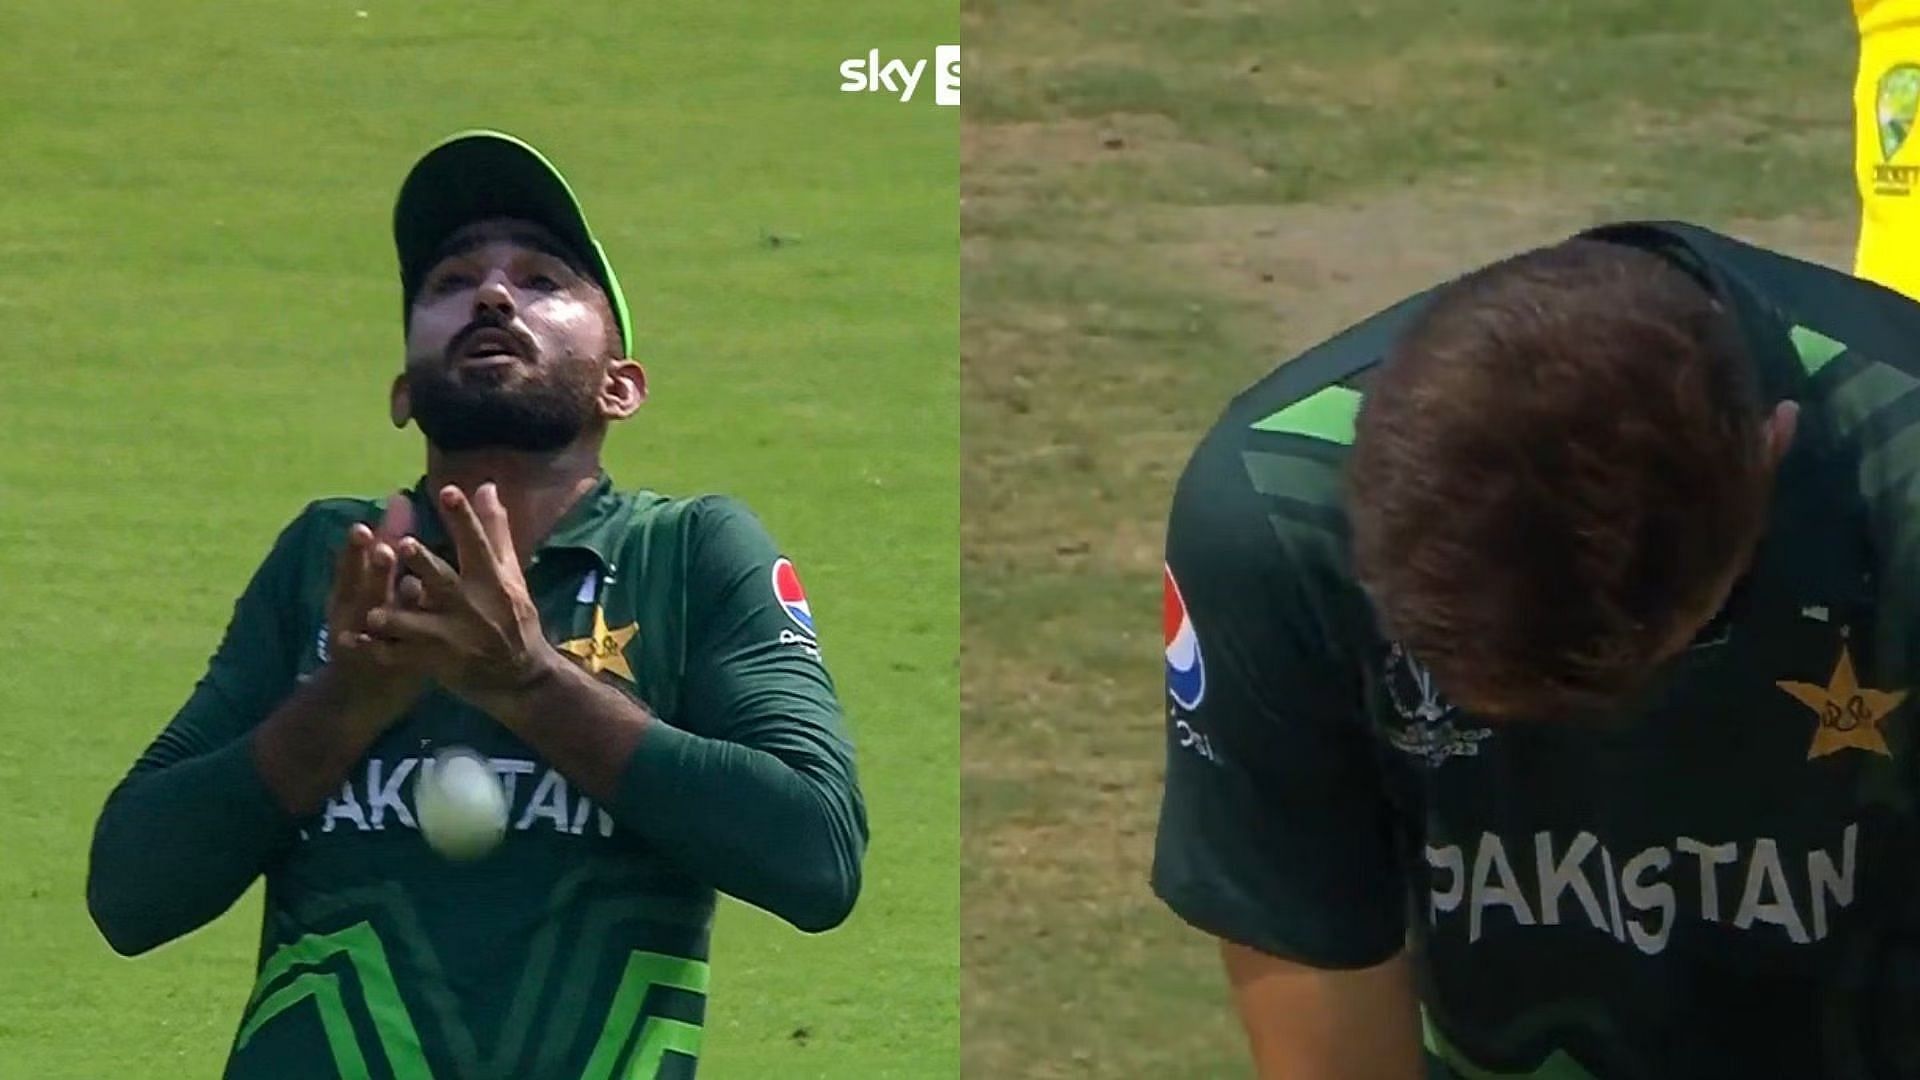 Usama Mir dropped an easy catch off Shaheen Shah Afridi